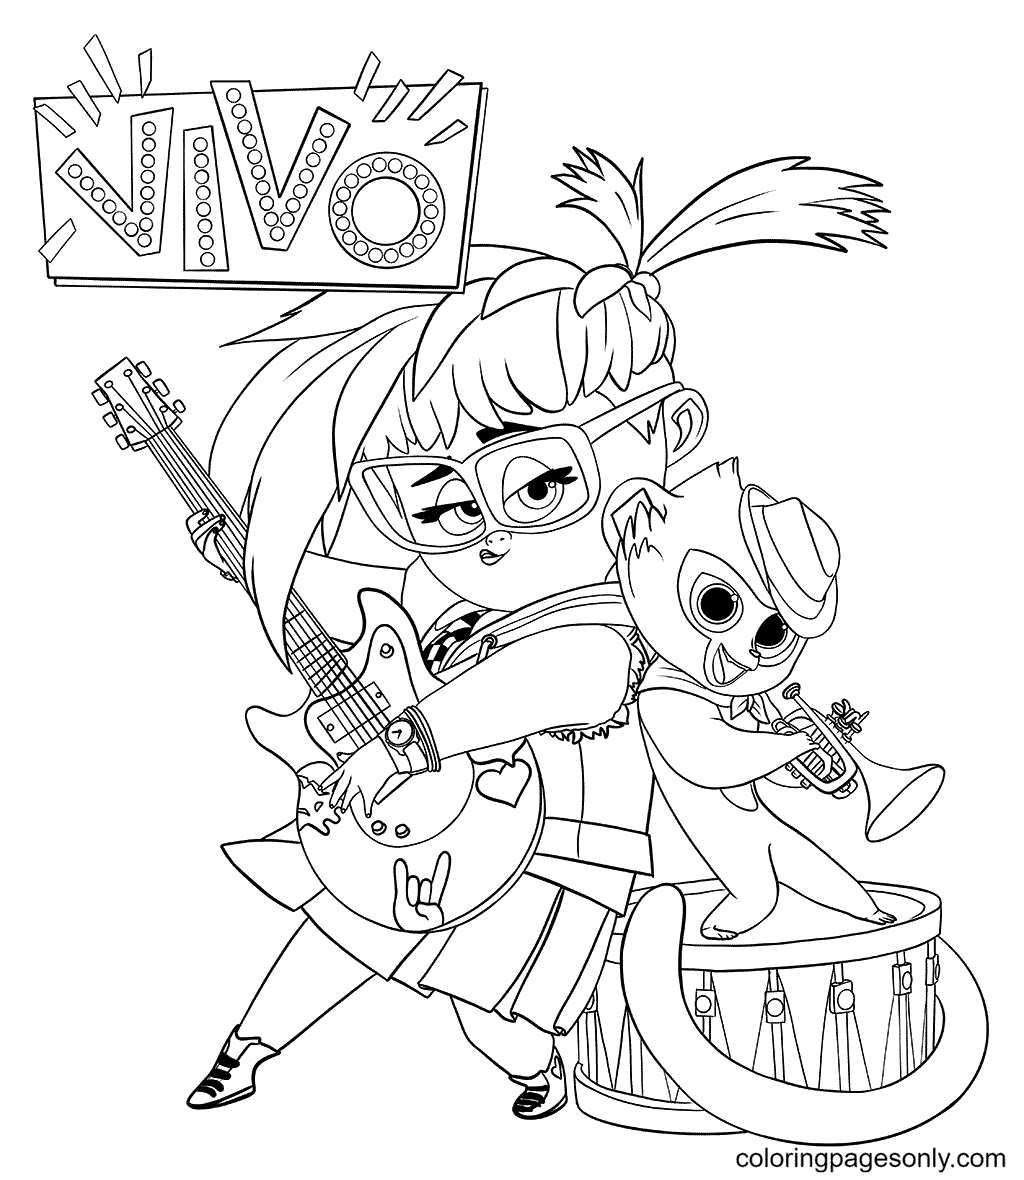 Monkey Vivo And Gabriela From Vivo Coloring Pages